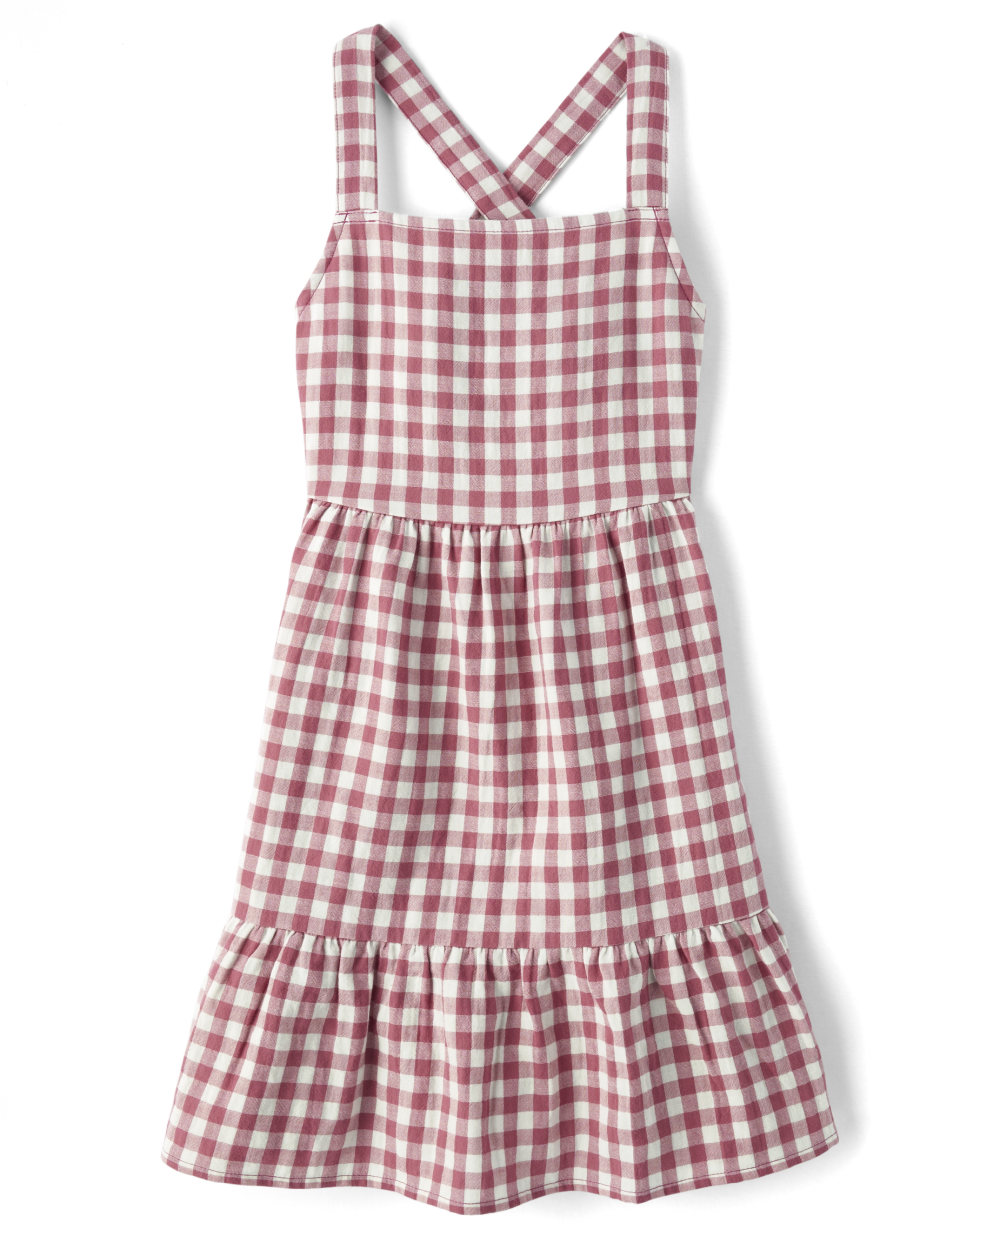 Girls Above the Knee Checkered Gingham Print Square Neck Sleeveless Dress With Ruffles